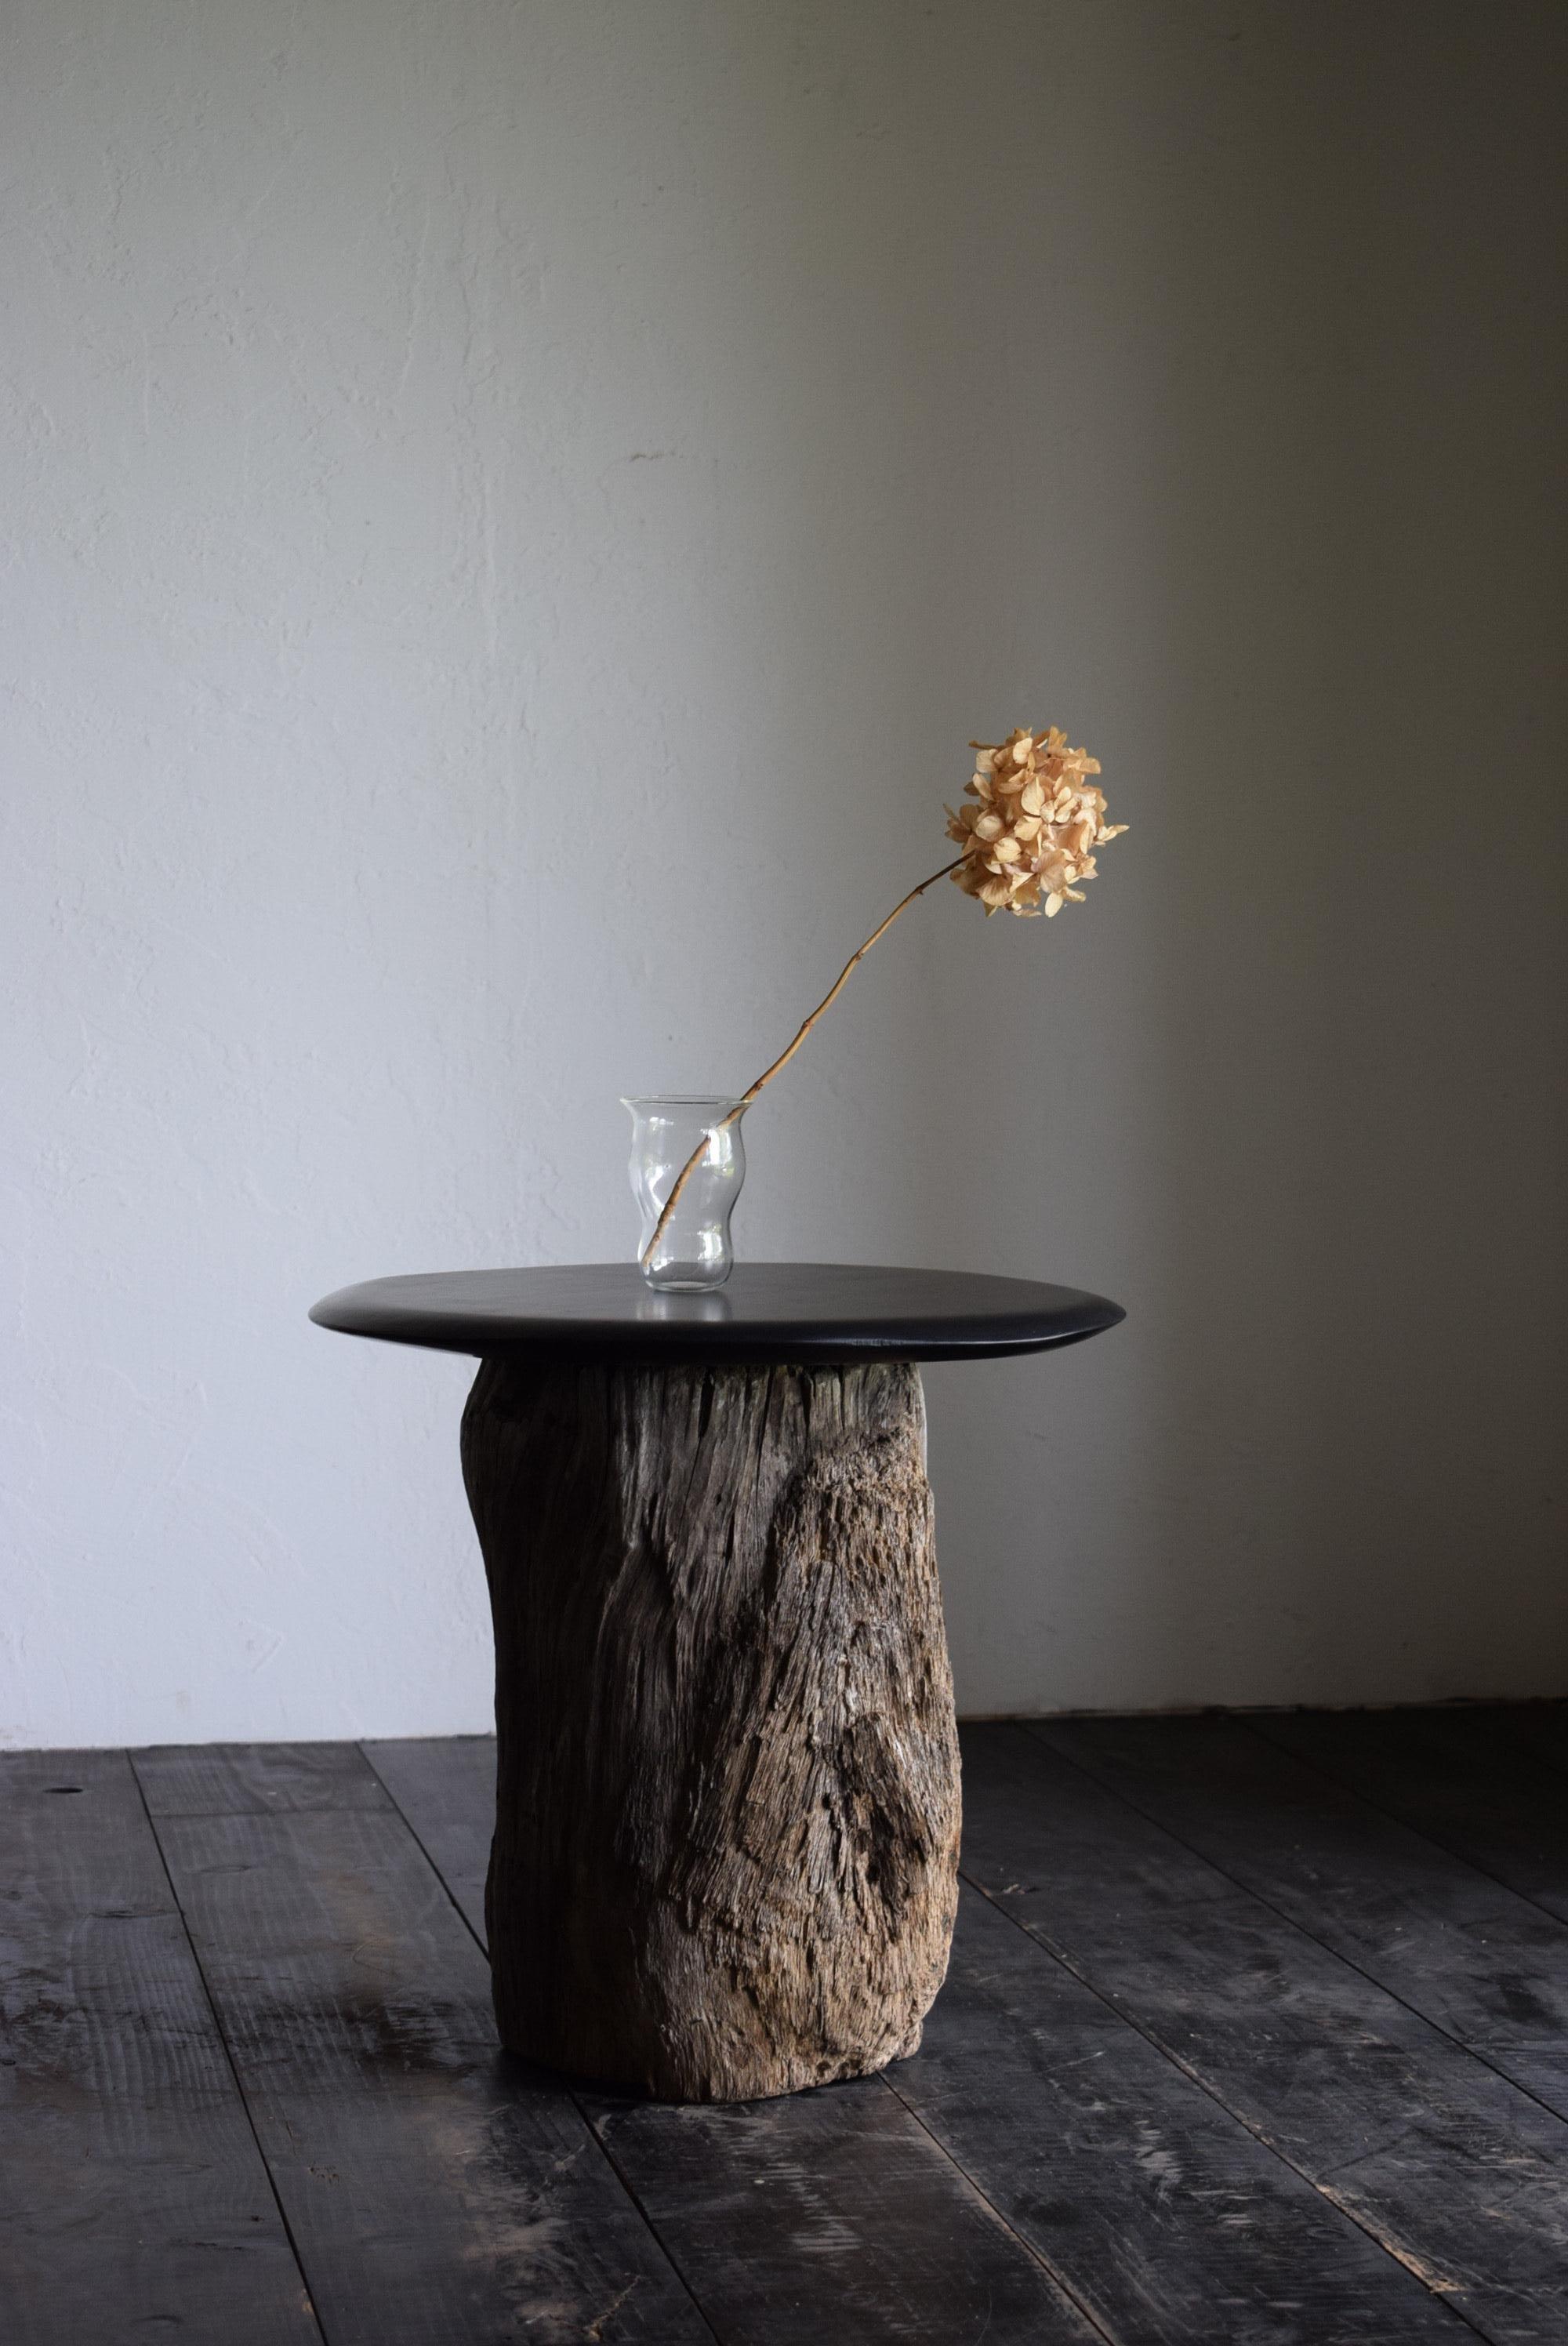 This side table has a lacquered black top attached to an old tree stump. It is about the same height as a coffee table and is easy to use.
The table's appearance and color are very Japanese and exude a sense of wabi-sabi.
The stump is heavy and